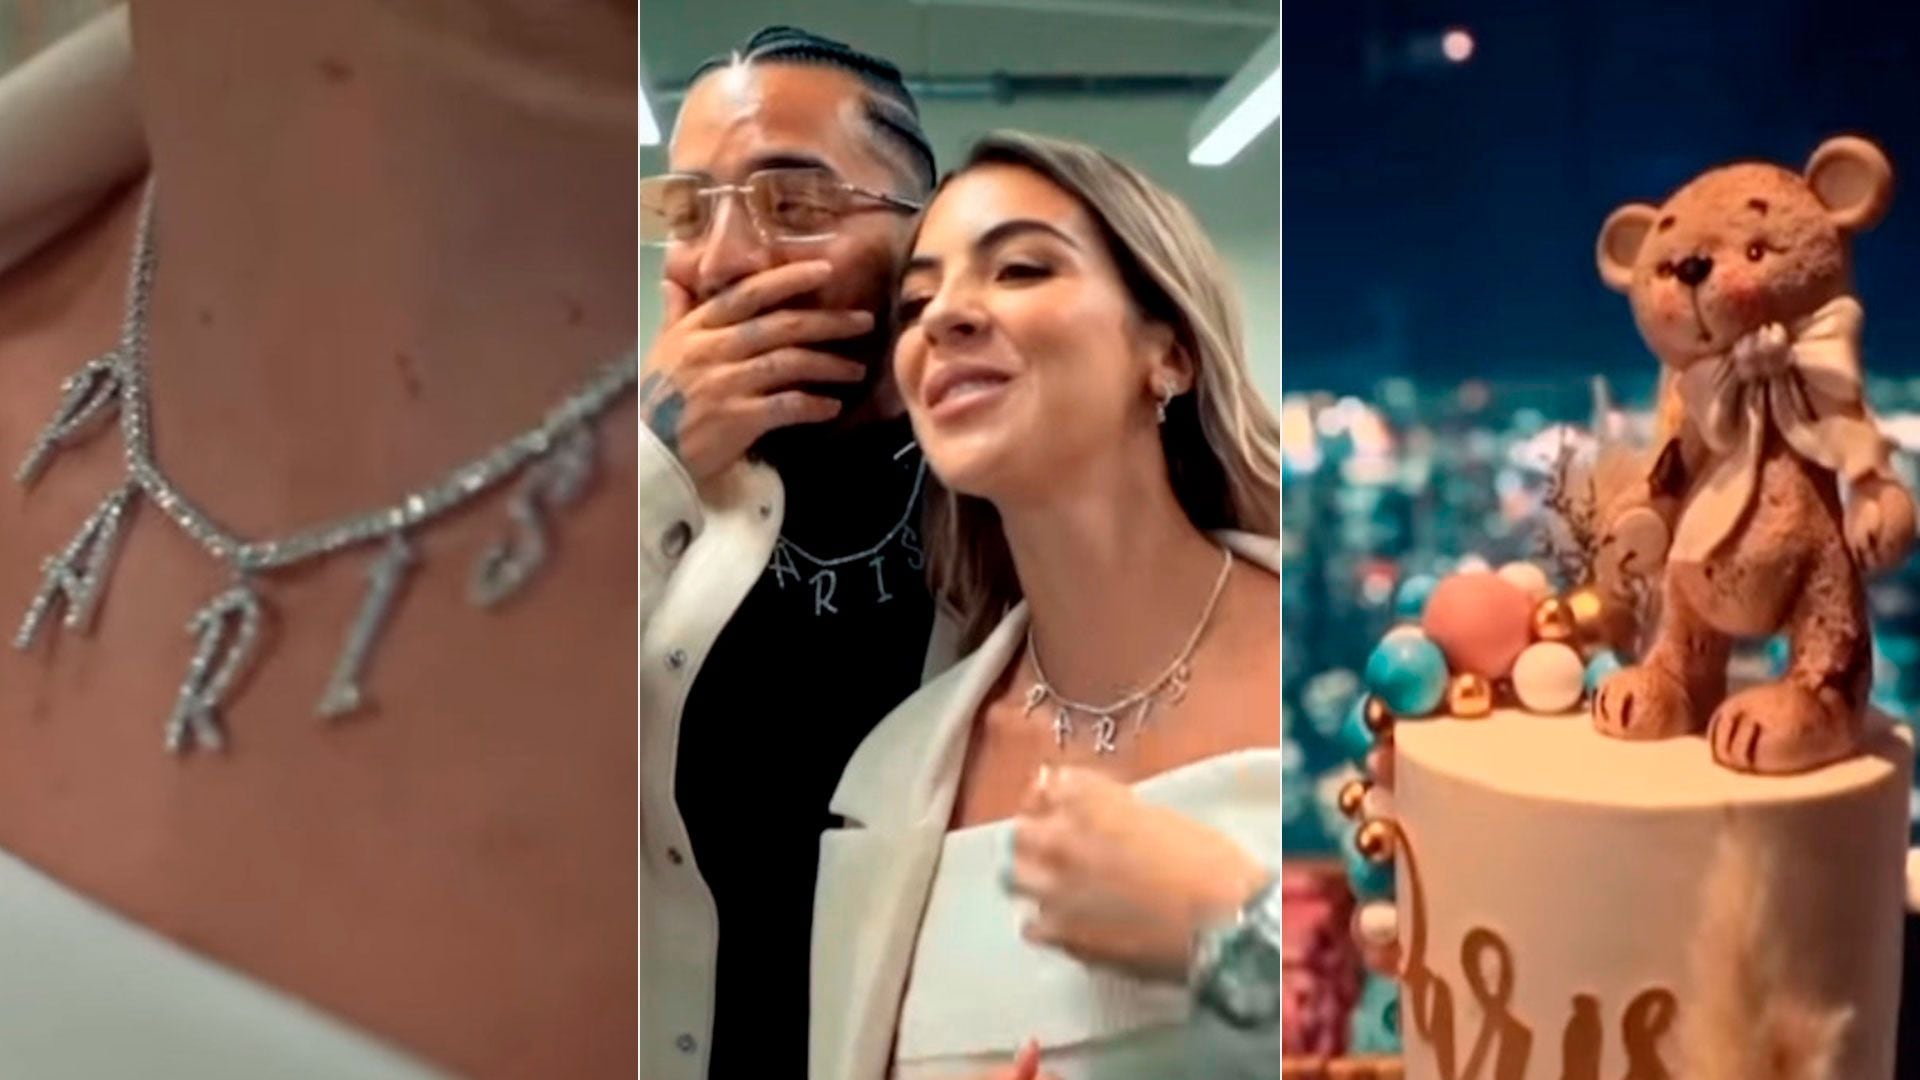 The images of Maluma and Susana the day they announced the gender of their baby on the way (Youtube)